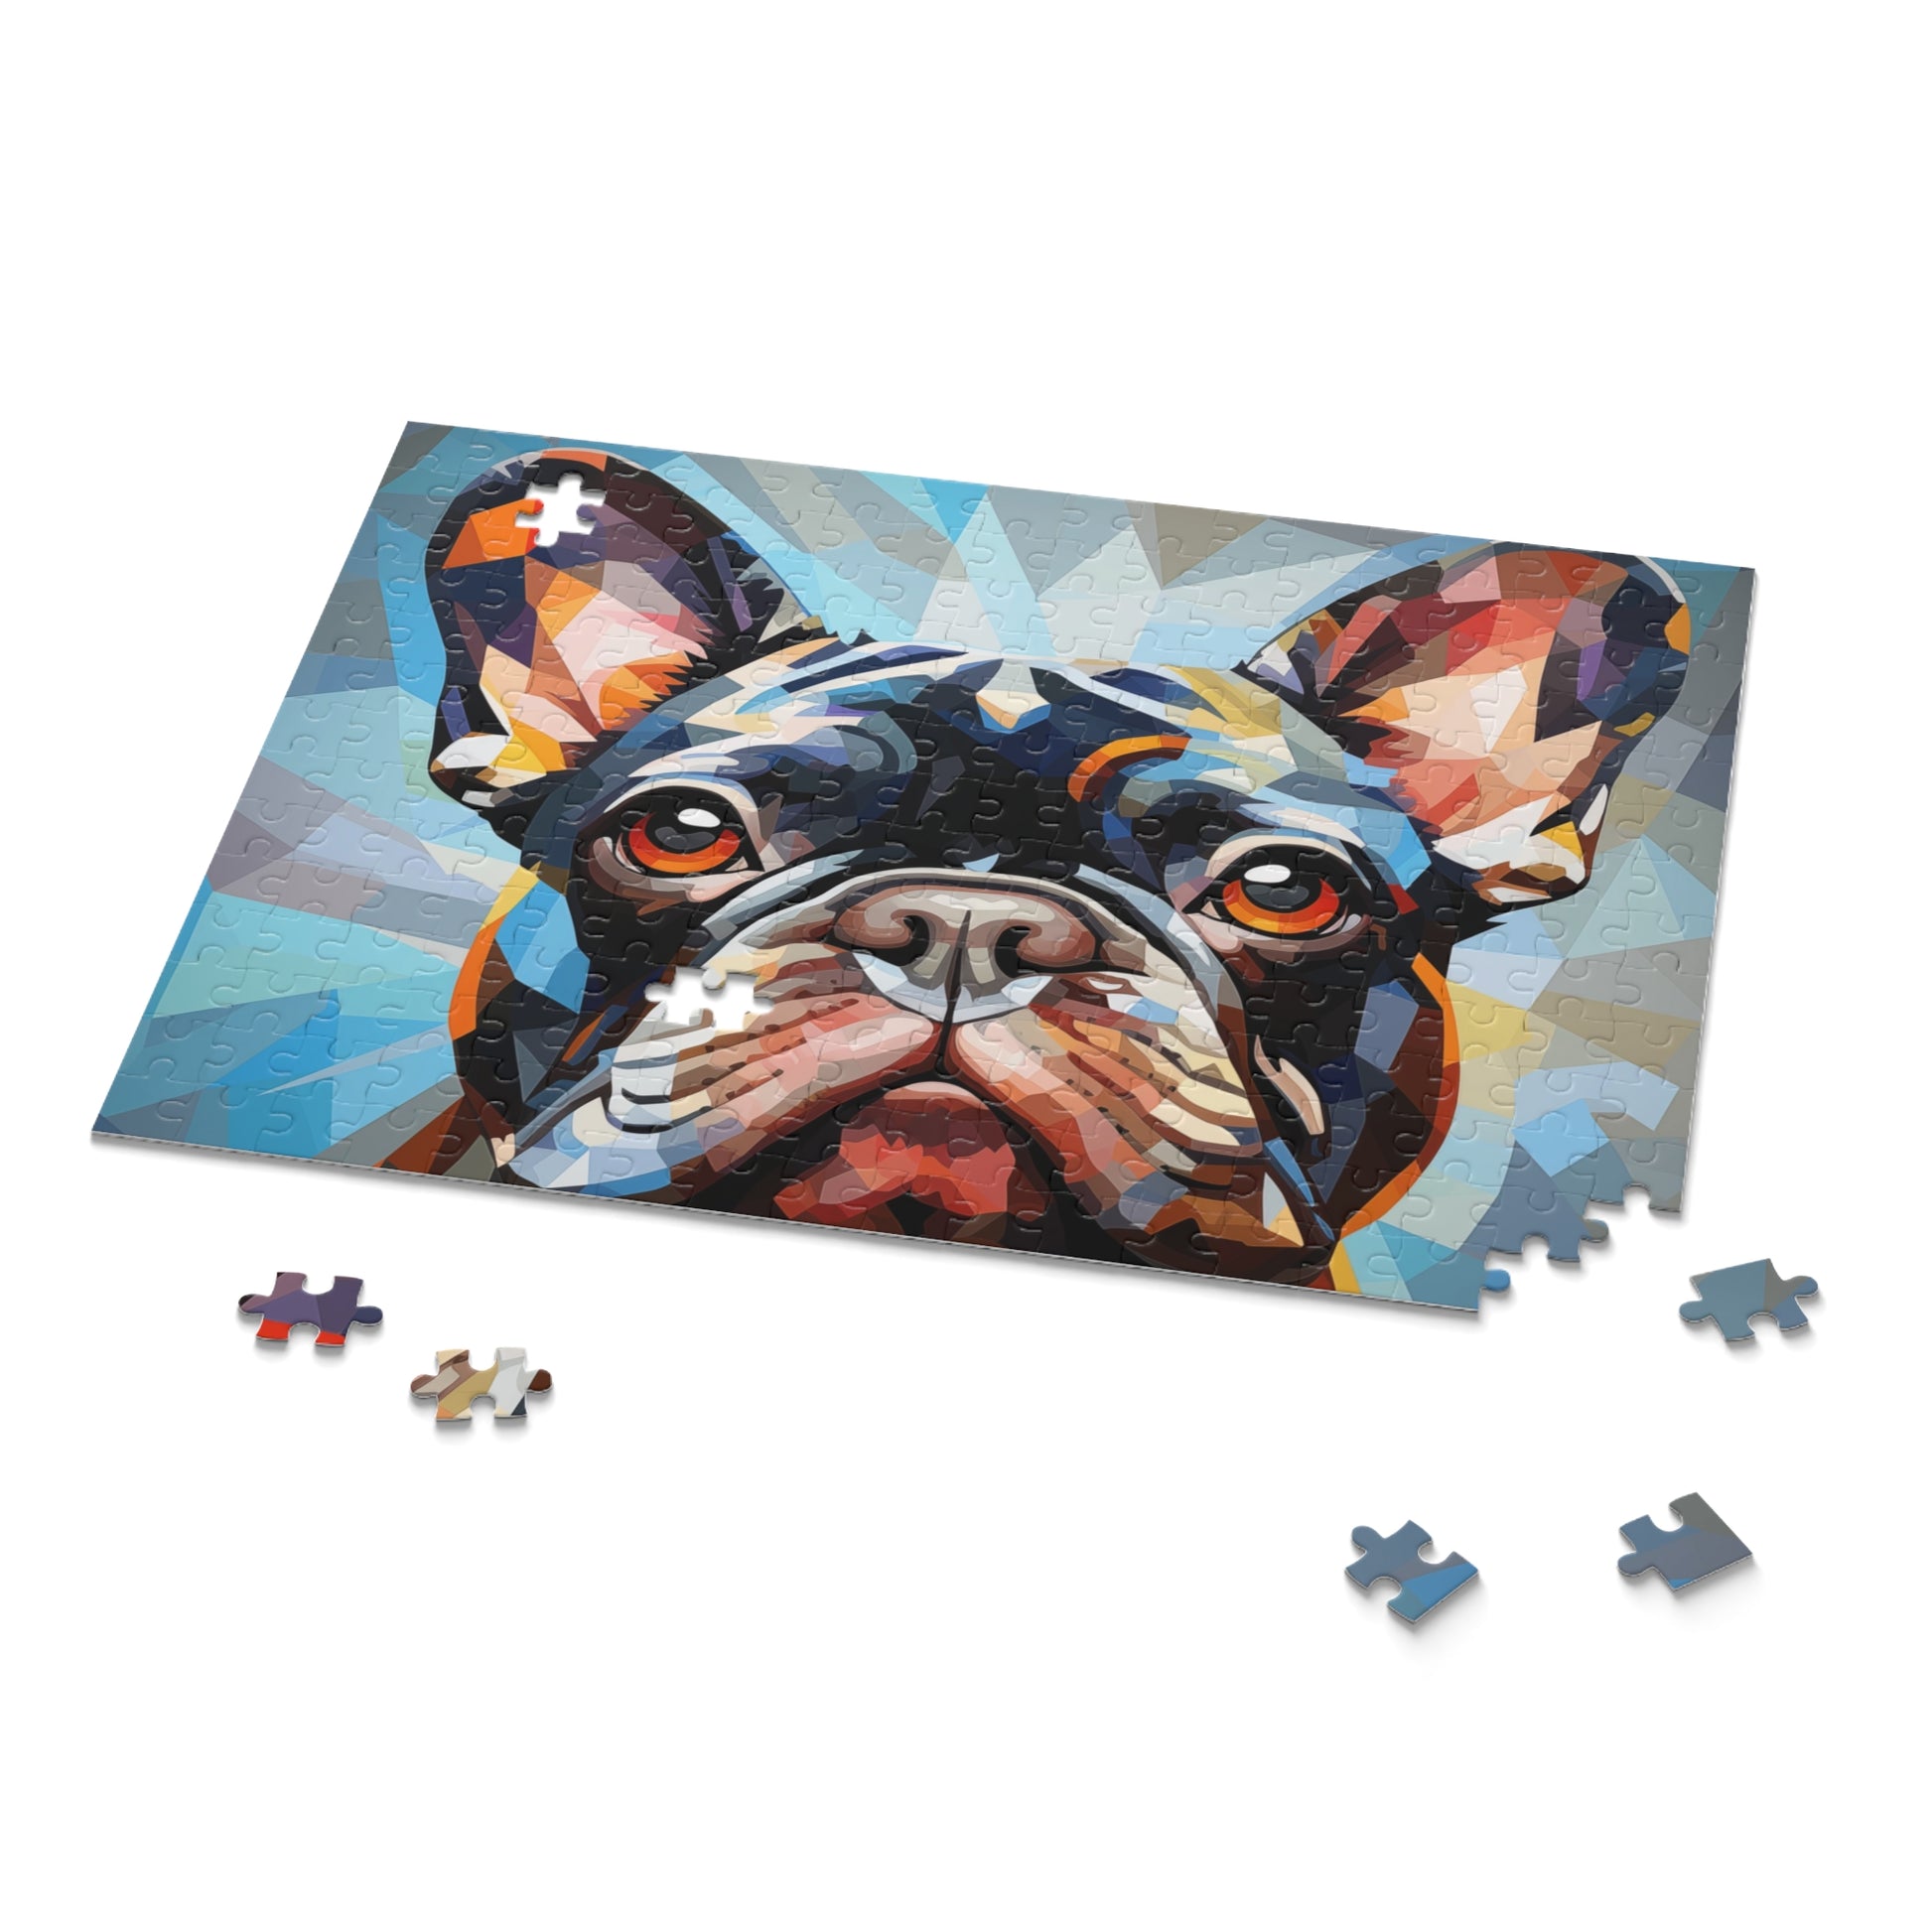 Frenchie Vibrant Abstract Jigsaw Dog Puzzle Oil Paint Adult Birthday Business Jigsaw Puzzle Gift for Him Funny Humorous Indoor Outdoor Game Gift For Her Online-9